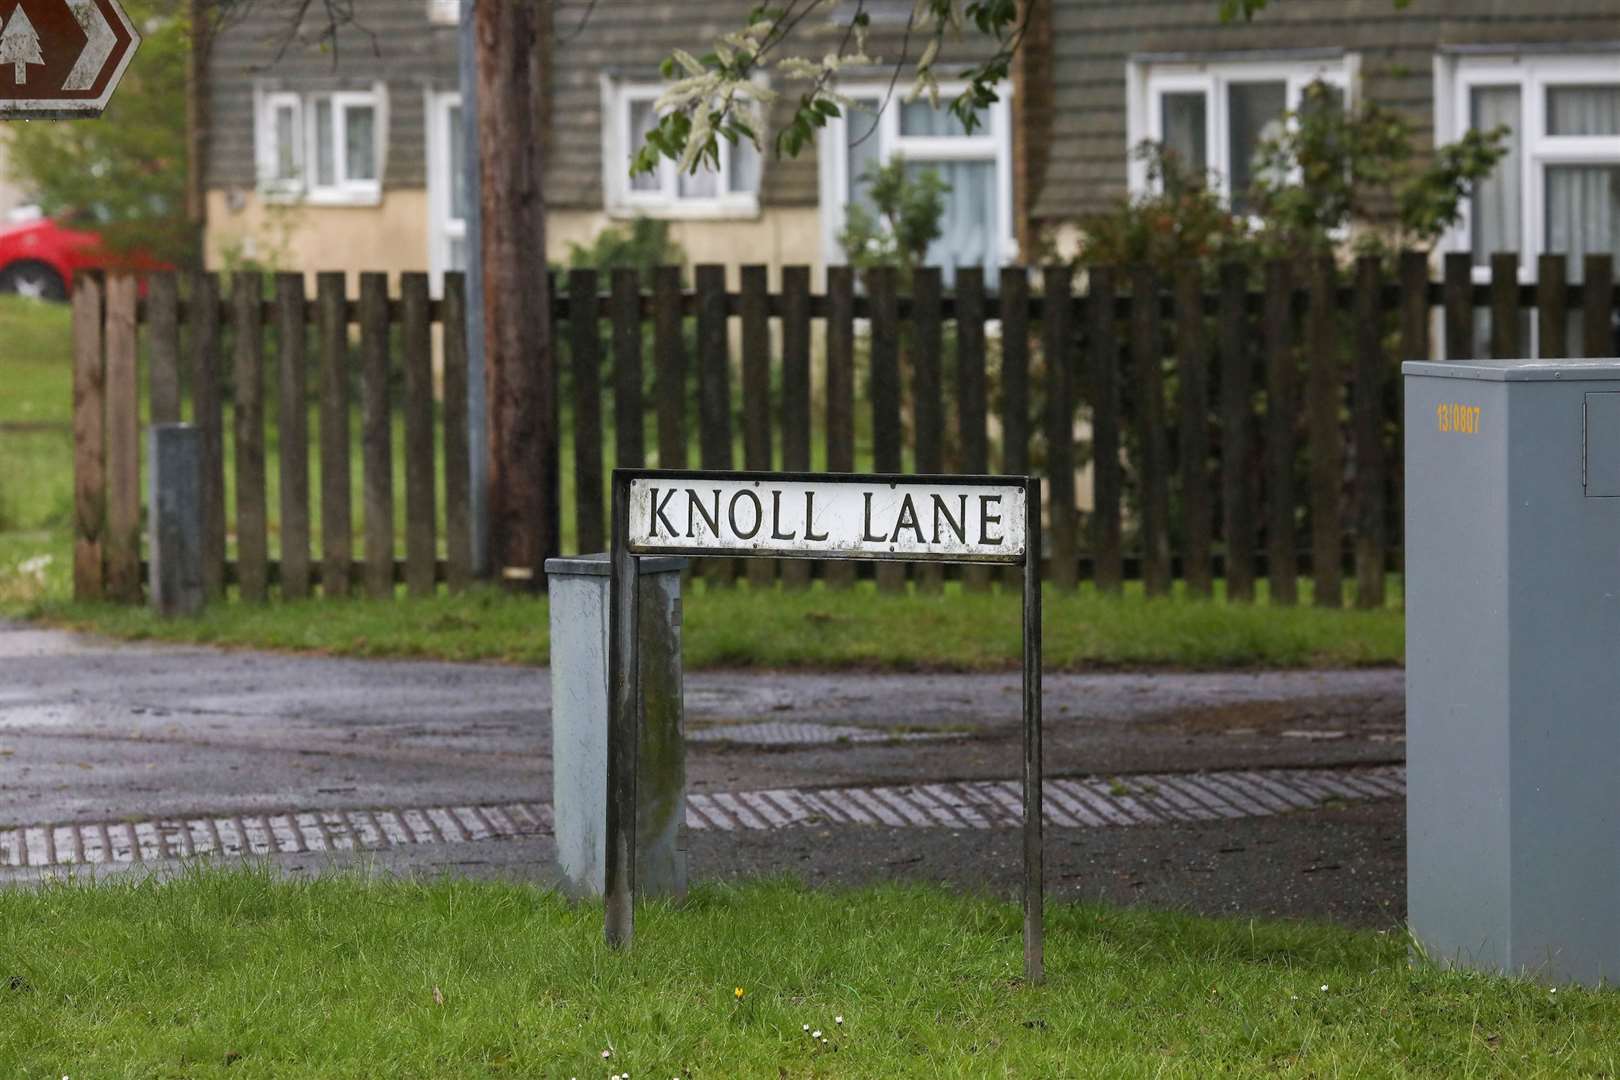 The thieves targeted Knoll Lane in Ashford Picture: UKNIP